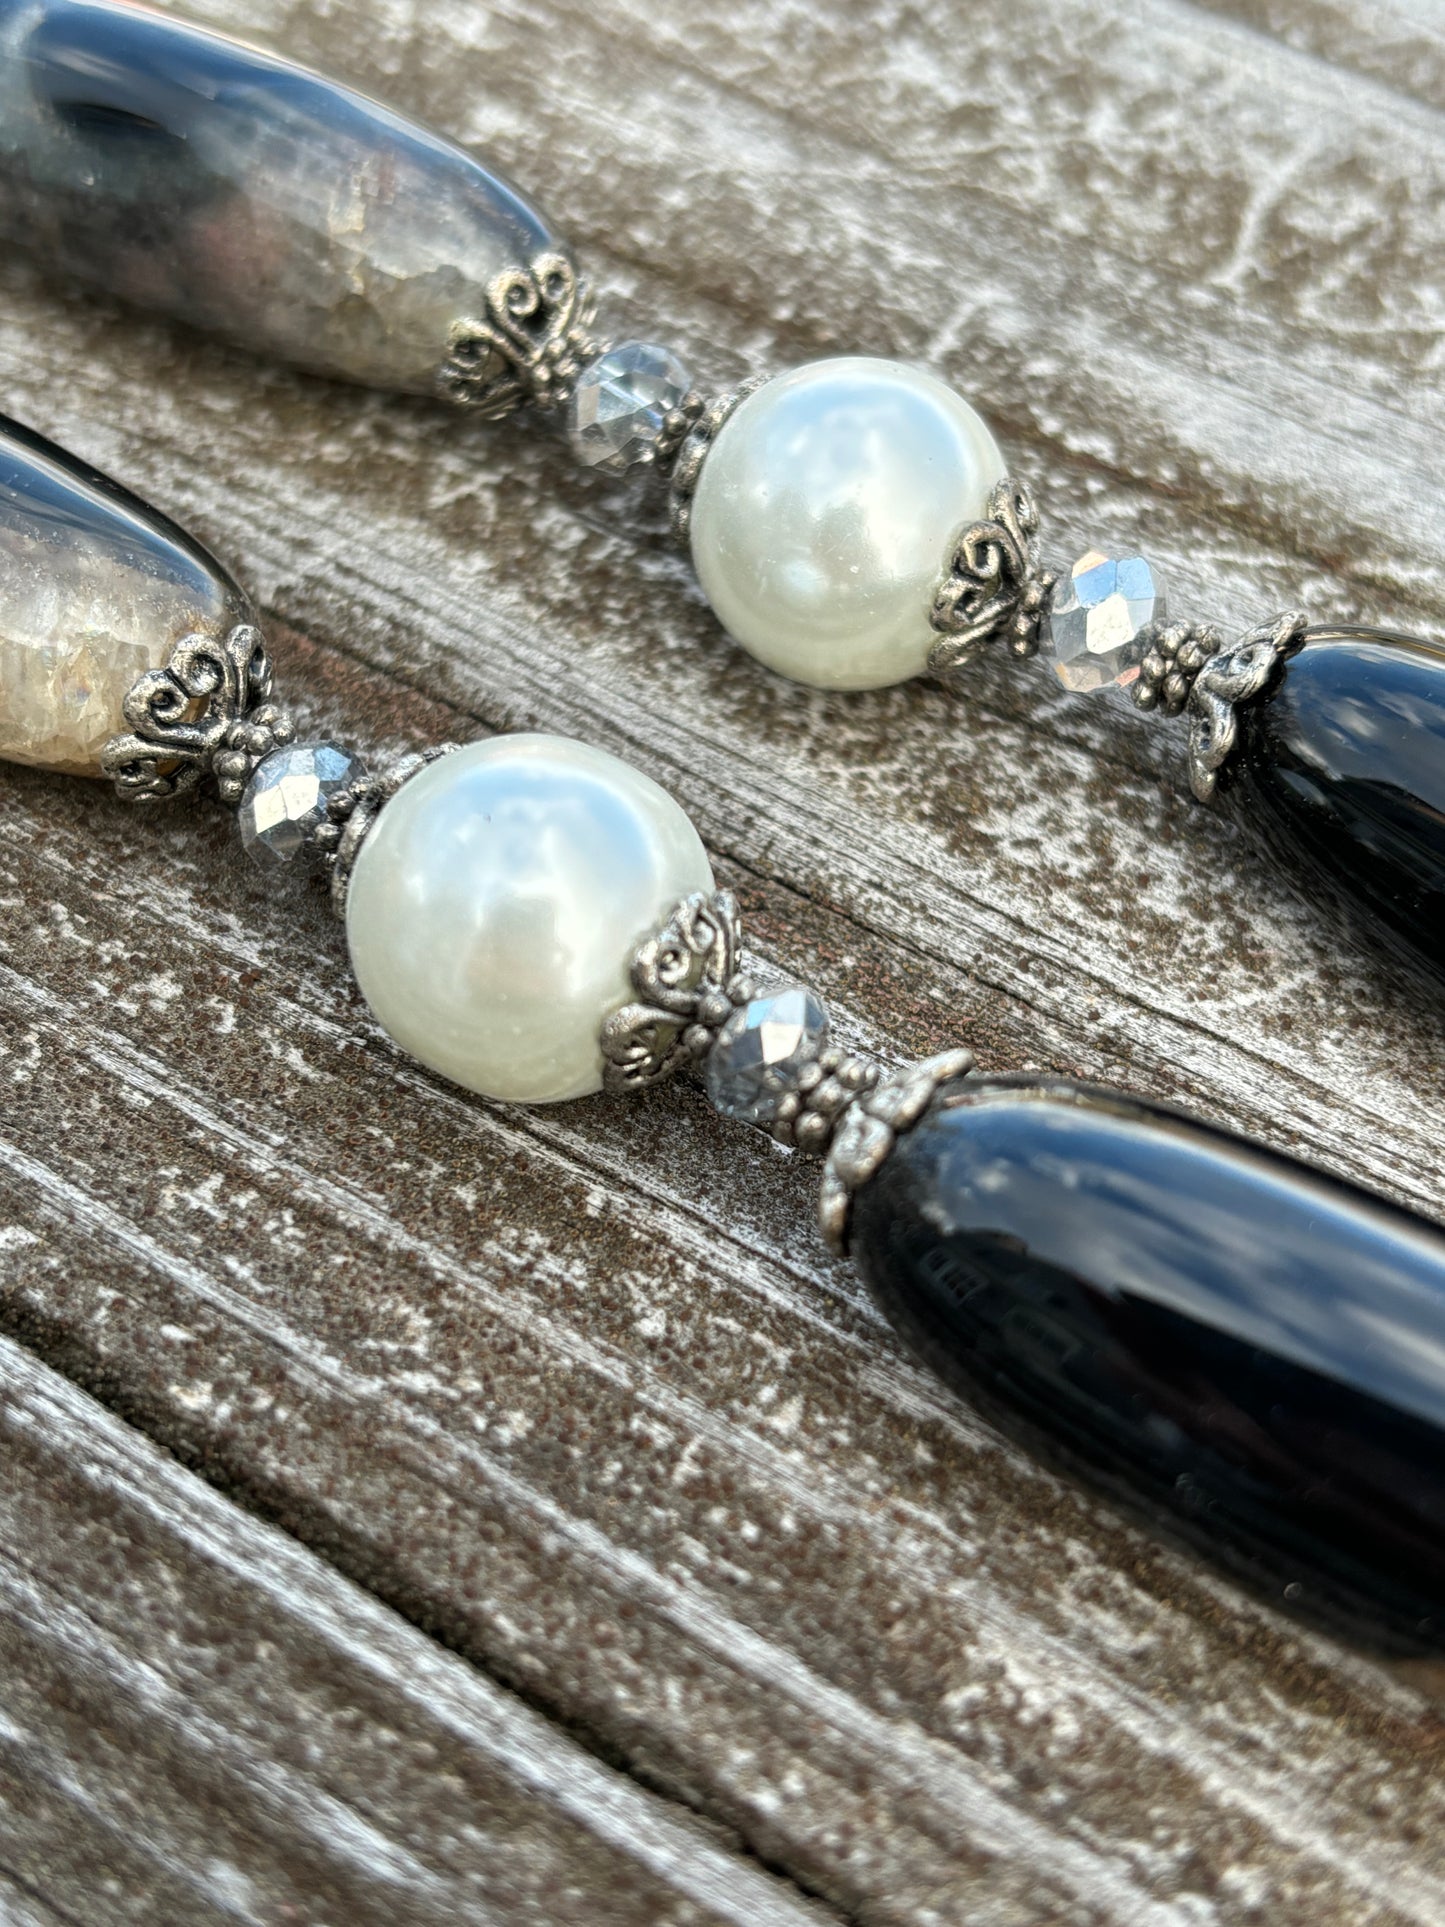 Chunky Cross and gemstone Necklace, Black and White Agate, Faux Pearls, SALE!